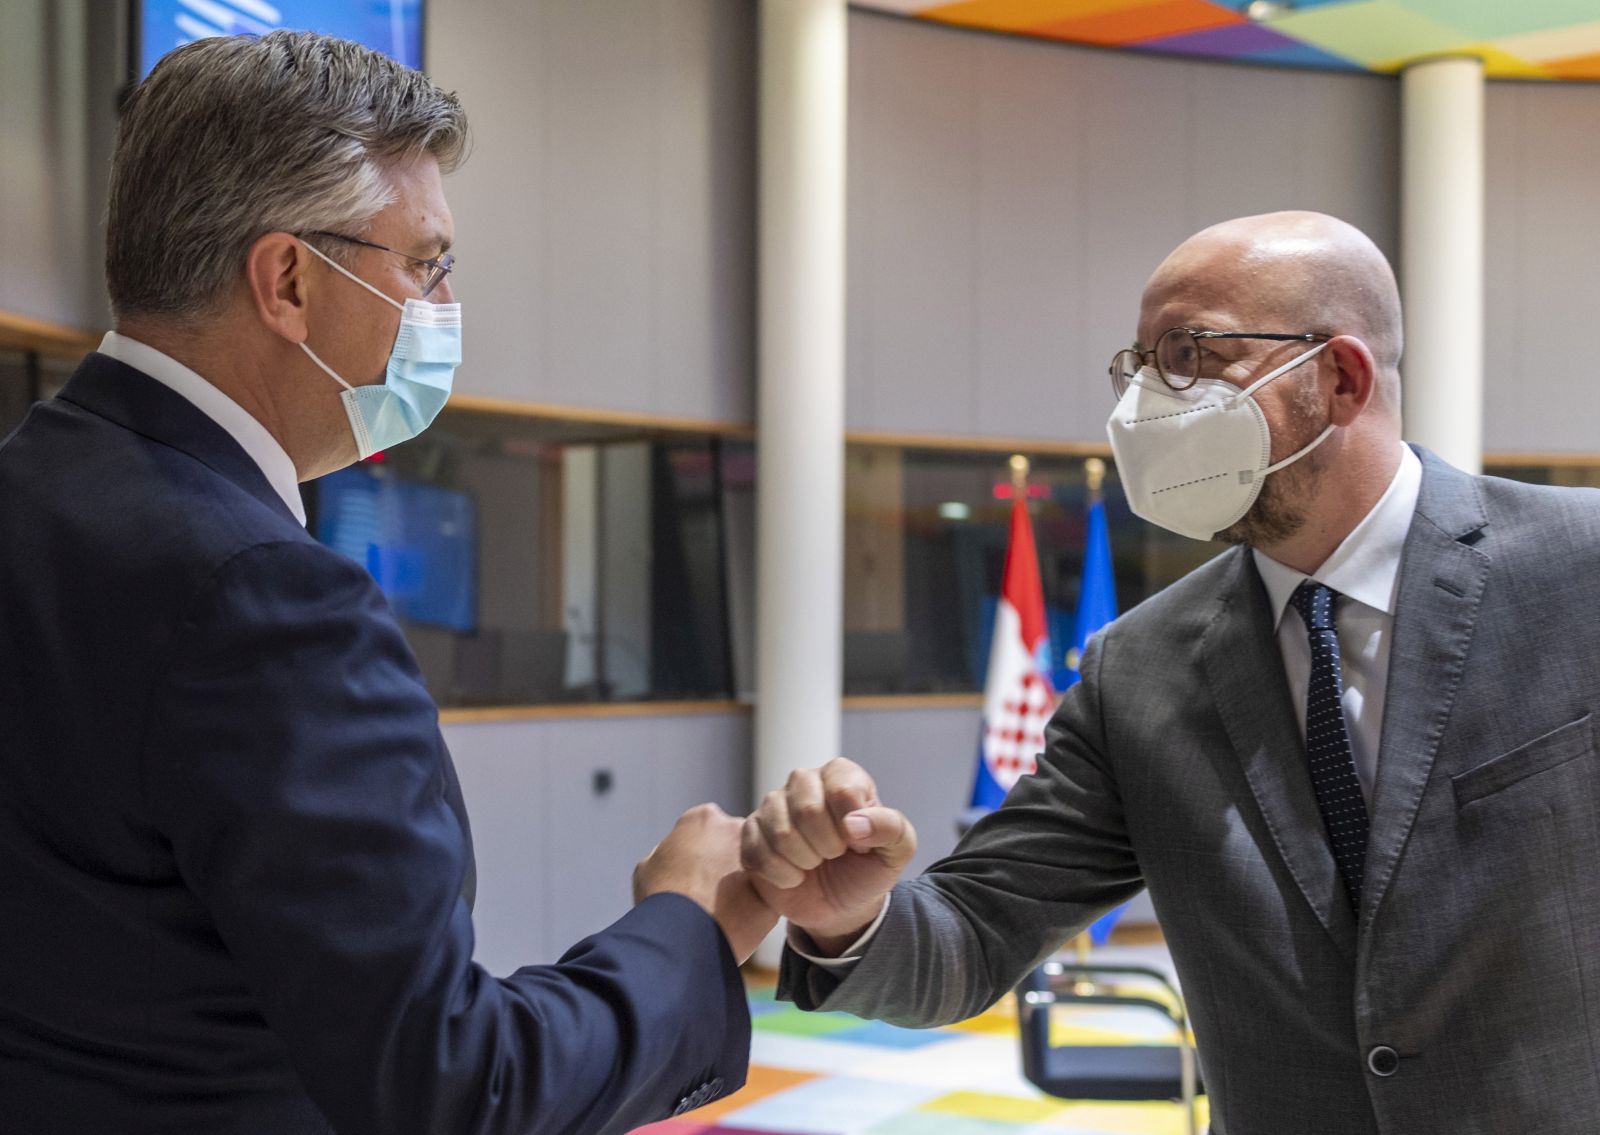 epa09225119 European Council President Charles Michel (R) greets Croatia's Prime Minister Andrej Plenkovic prior to a meeting on the sidelines of an EU summit in Brussels, Belgium, 24 May 2021. European Union leaders are expected, during a two day in-person meeting, to focus on foreign relations, including Russia, and the UK.  EPA/Olivier Matthys / POOL